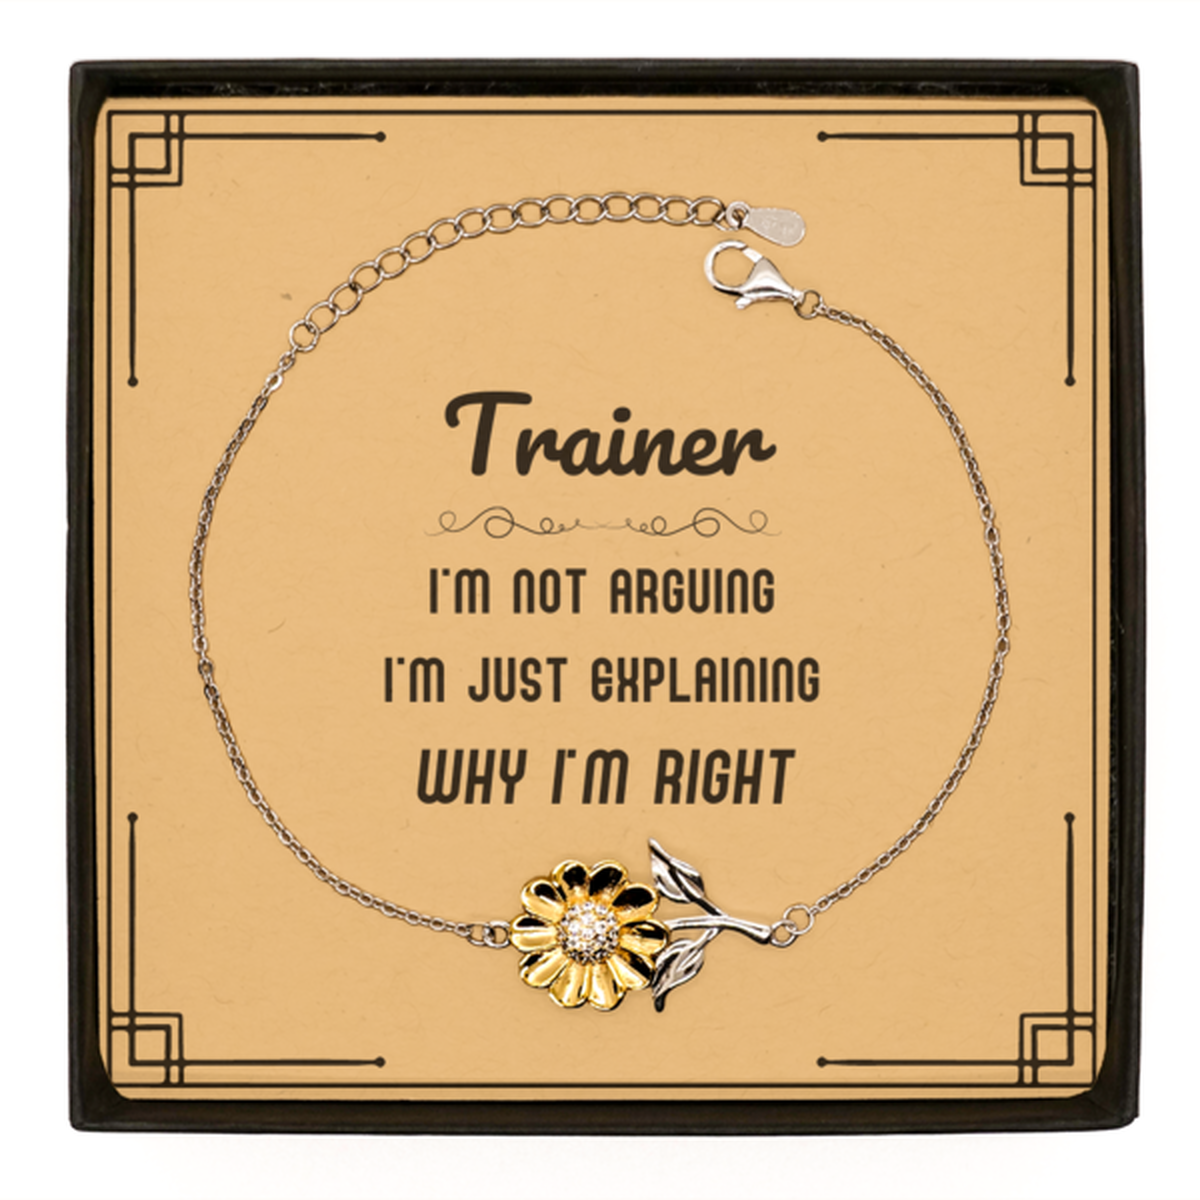 Trainer I'm not Arguing. I'm Just Explaining Why I'm RIGHT Sunflower Bracelet, Funny Saying Quote Trainer Gifts For Trainer Message Card Graduation Birthday Christmas Gifts for Men Women Coworker